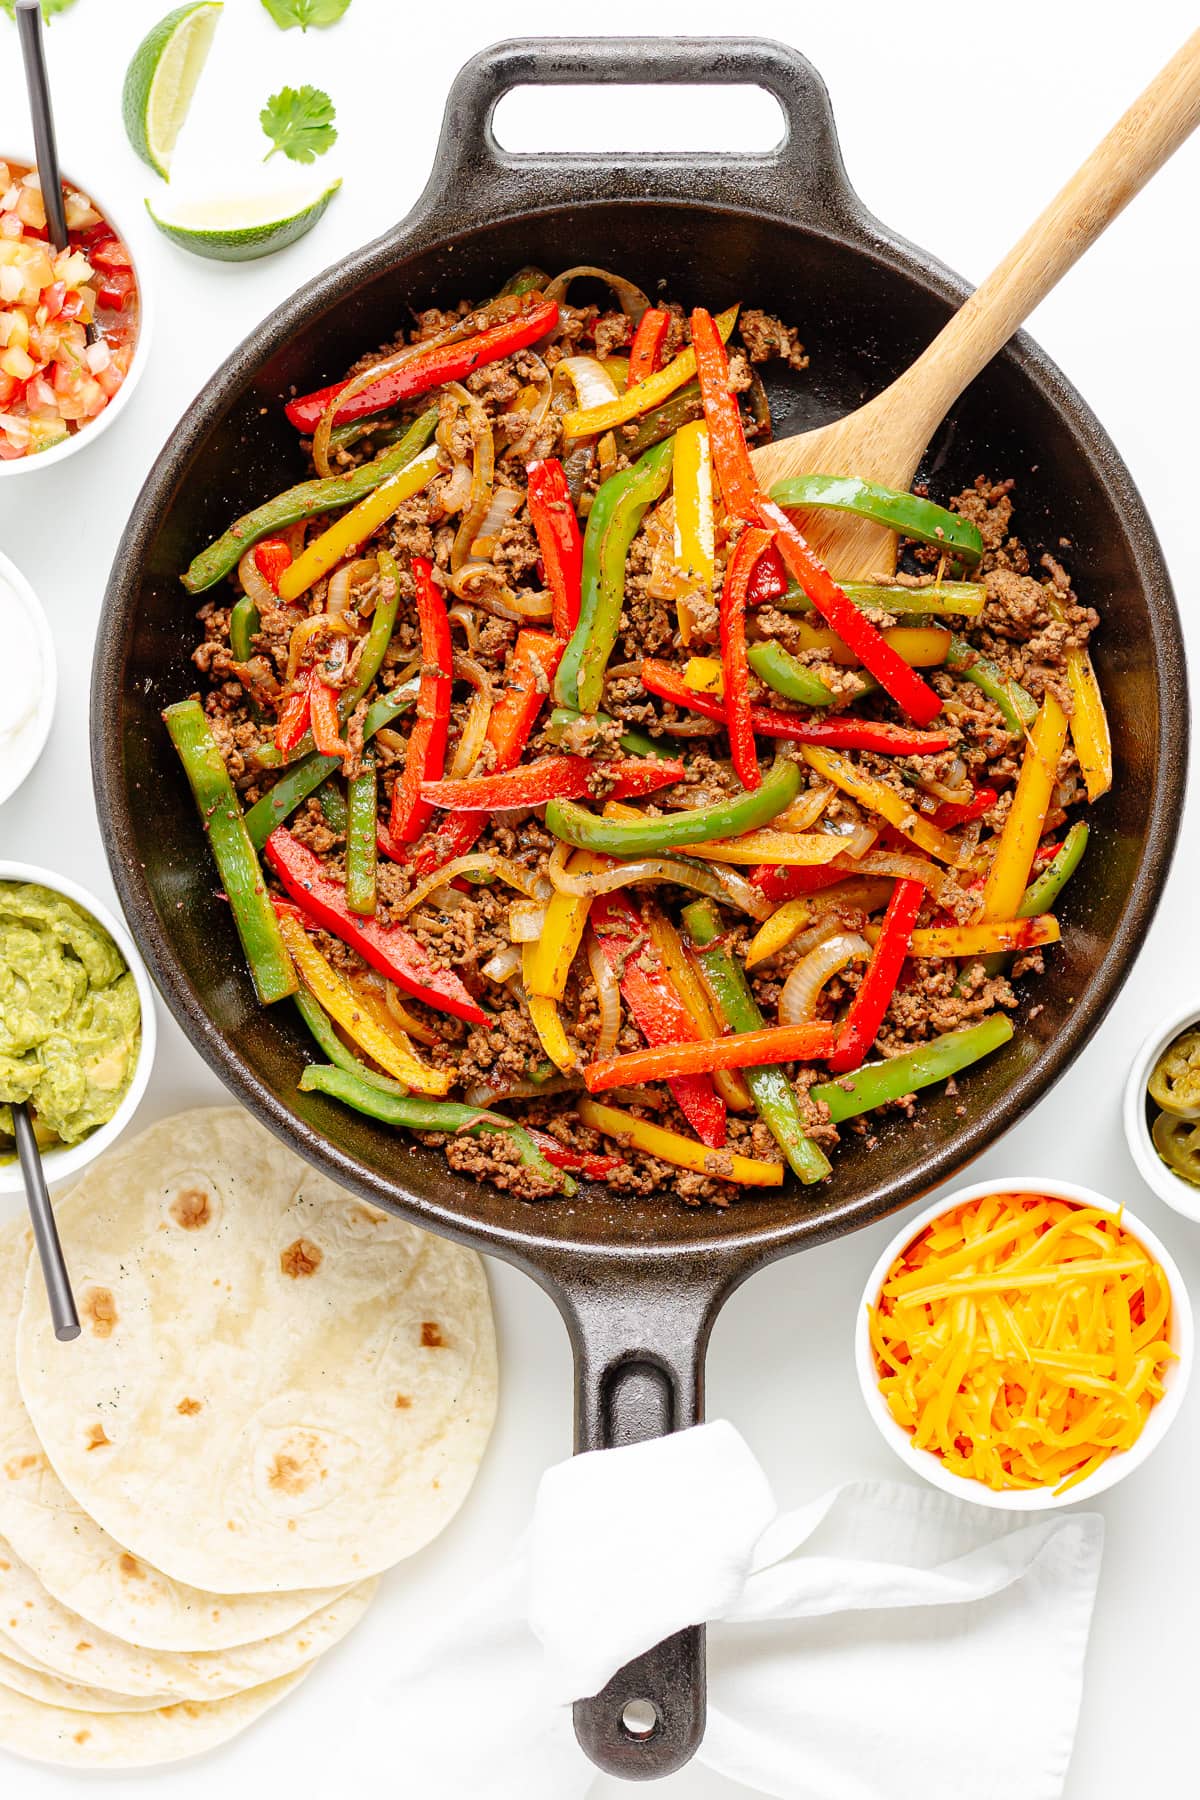 Ground beef fajitas filling in a cast iron skillet with wooden spoon, surrounded by a variety of toppings and tortillas.